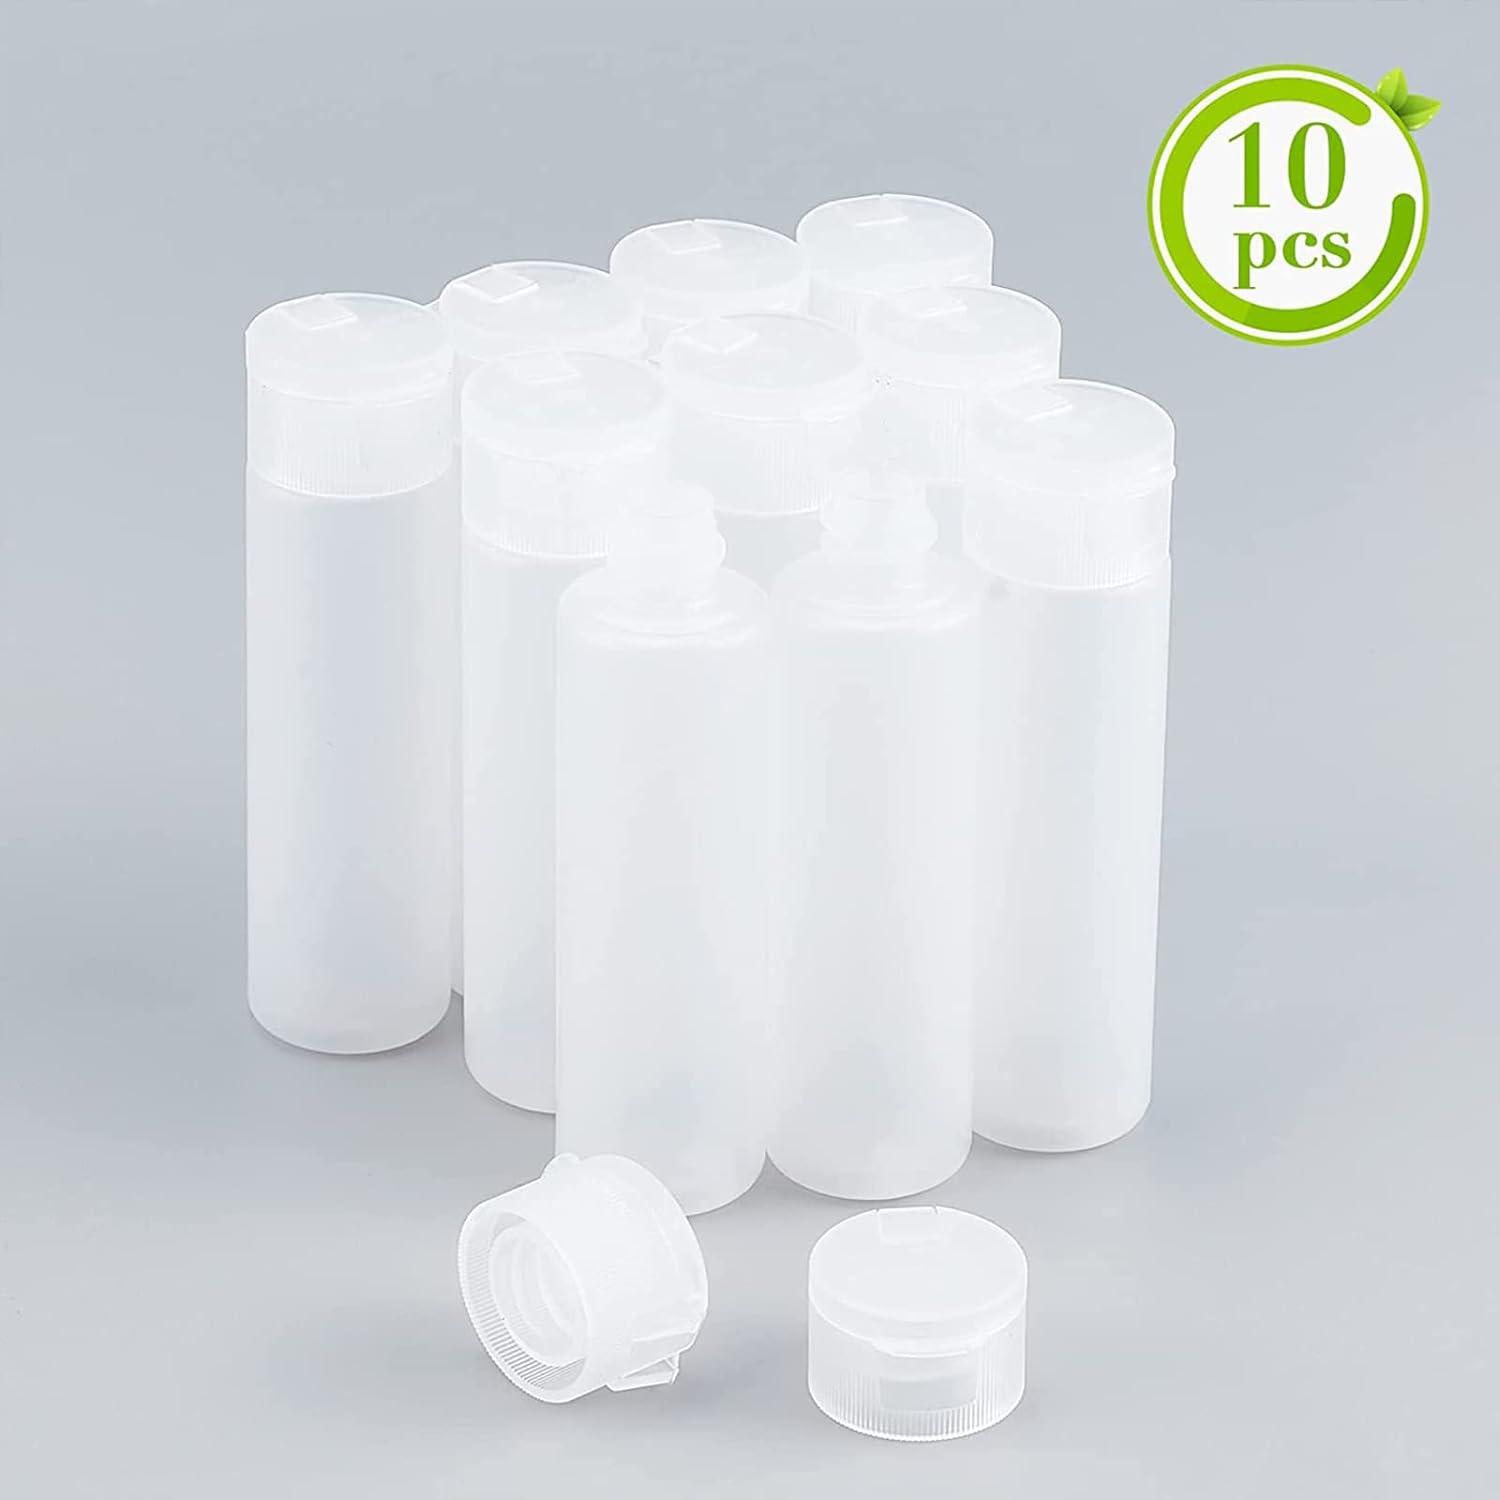 Wholesale BENECREAT 20 Pack 2 Ounce(60ml) Plastic Squeeze Dispensing  Bottles with Red Tip Caps - Good For Crafts 